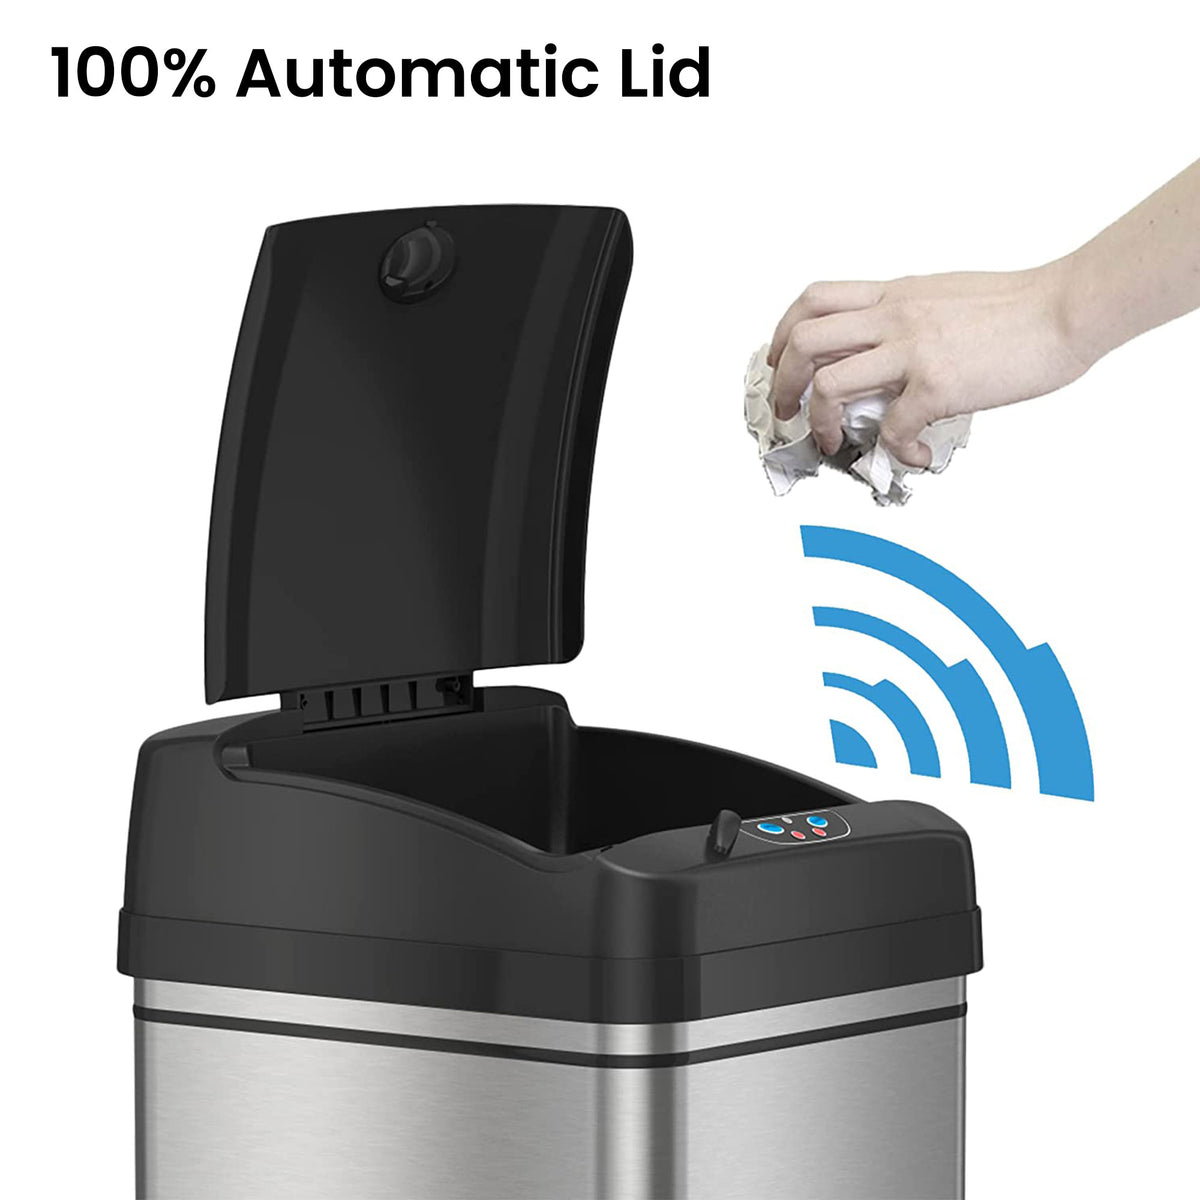 iTouchless Stainless Steel Trash Can with wheels 100% Automatic Lid